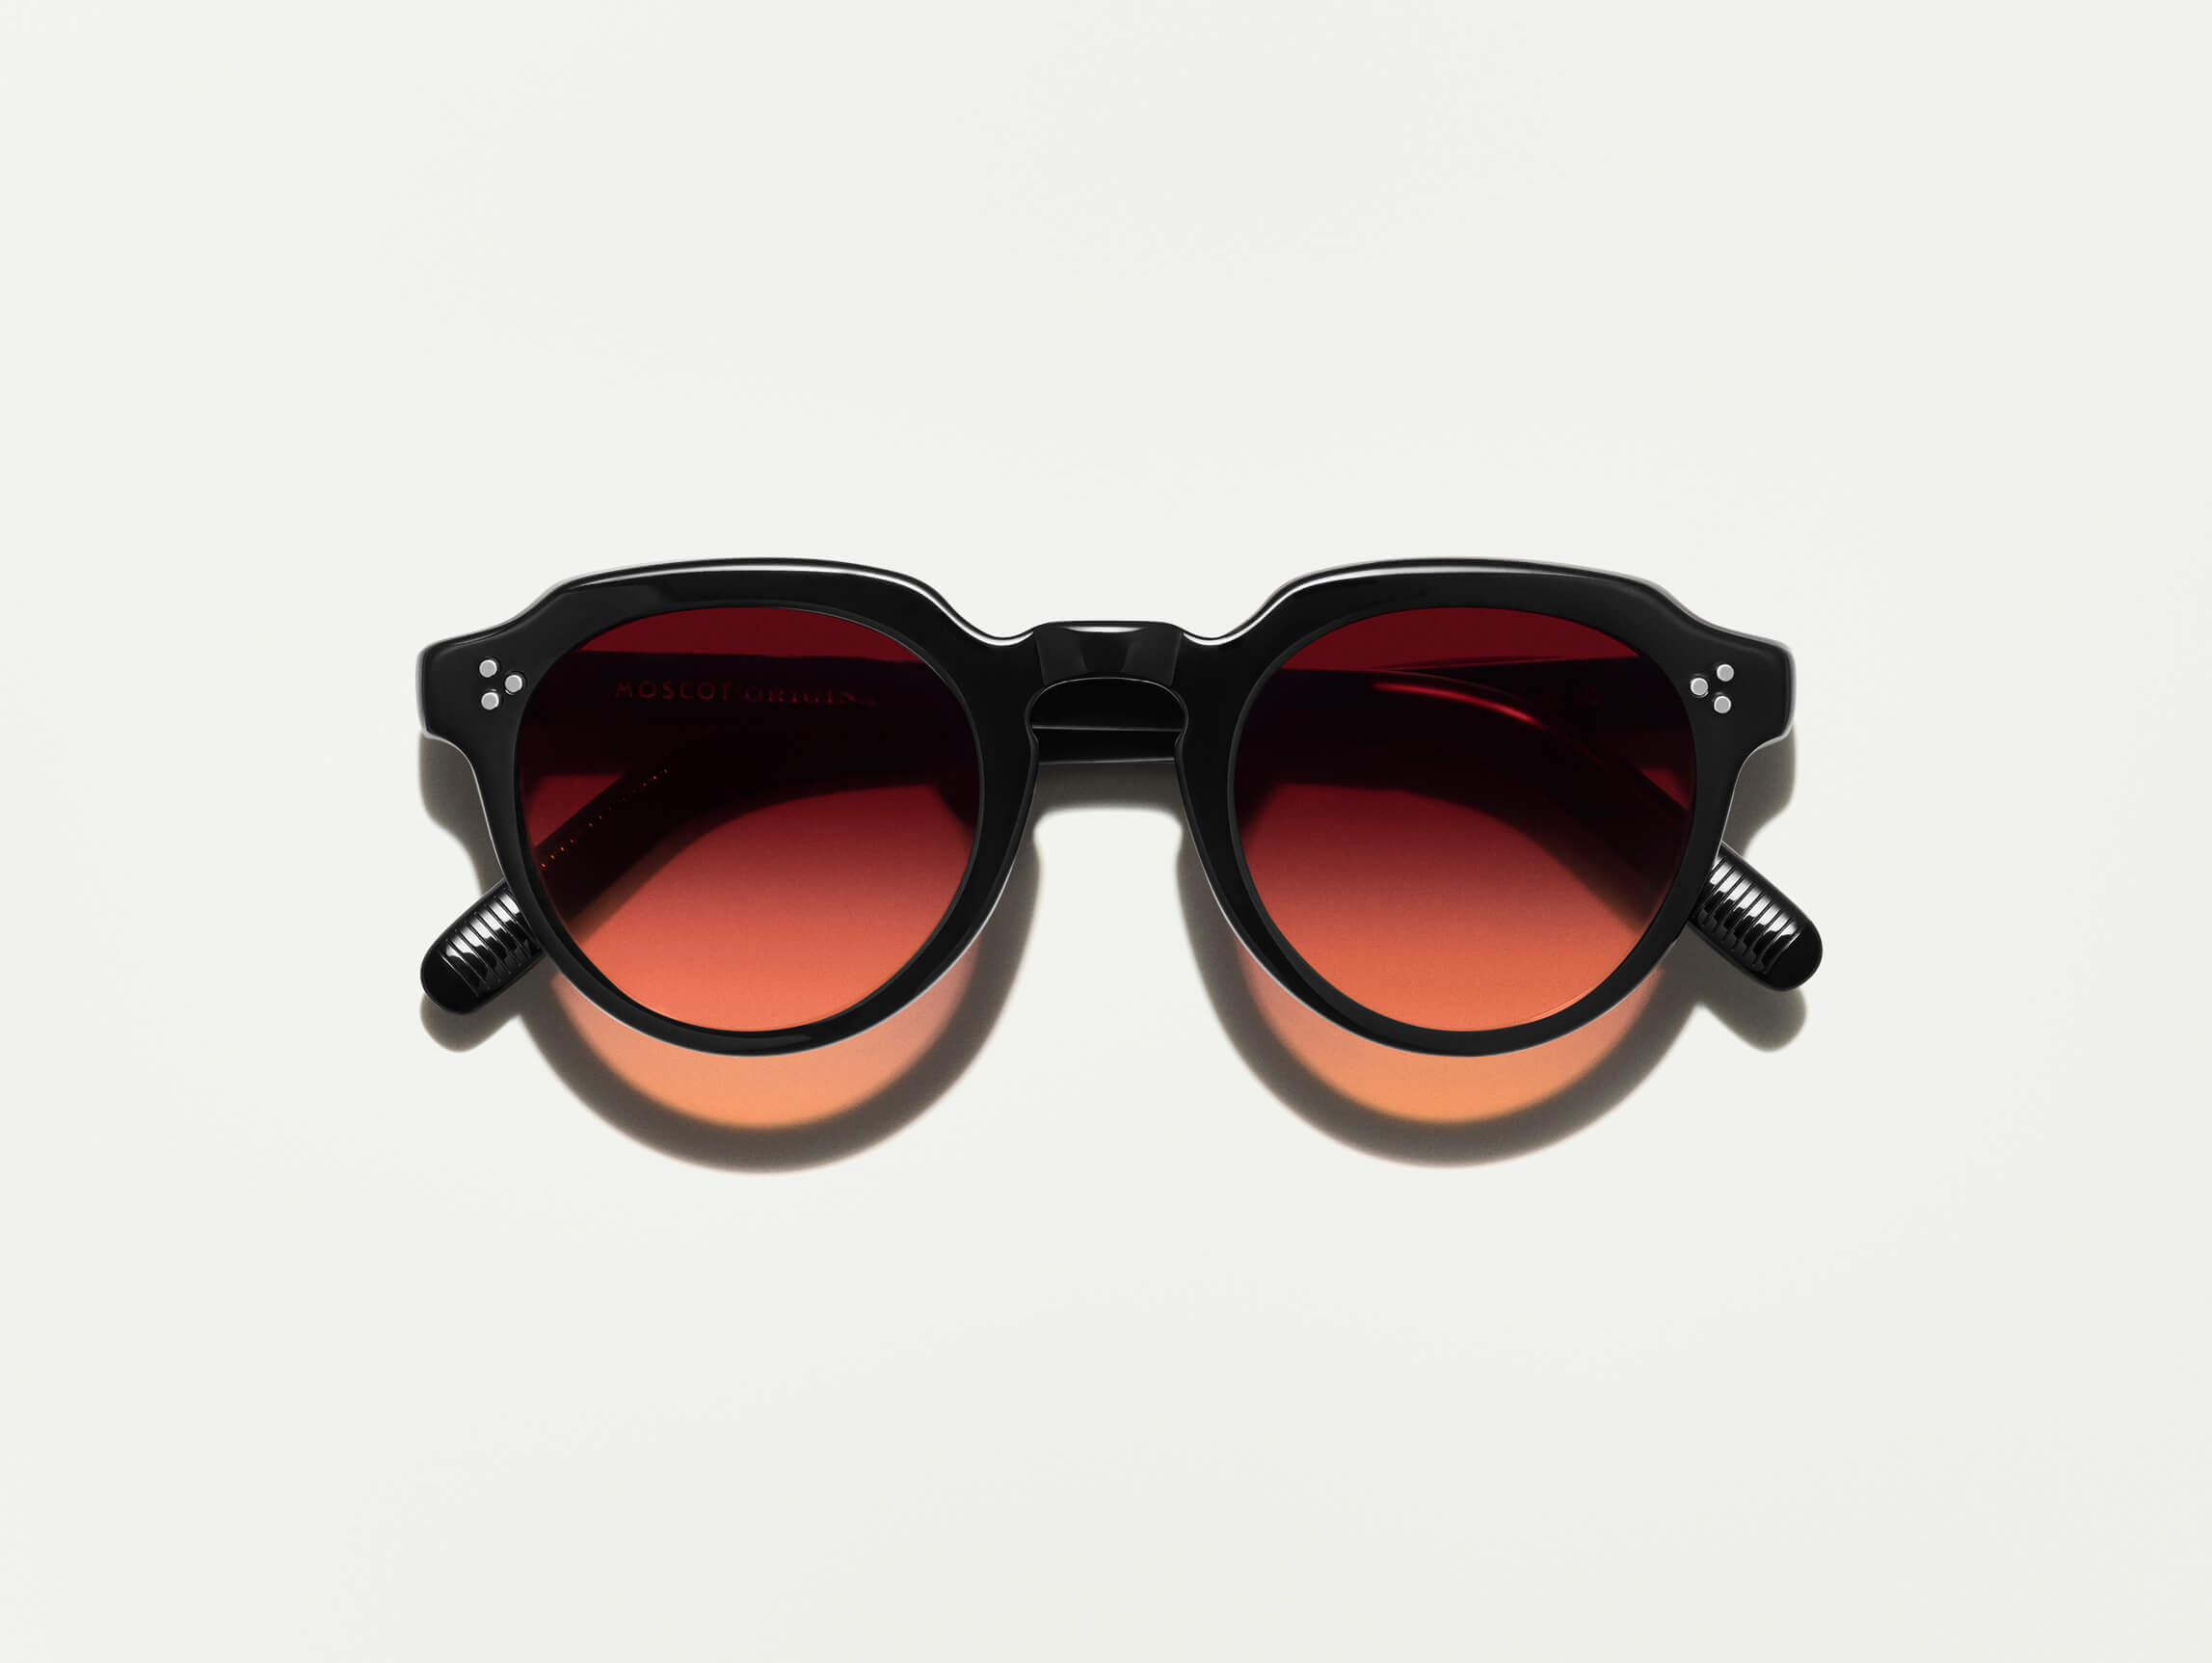 The GAVOLT SUN in Black with Cabernet Tinted Lenses